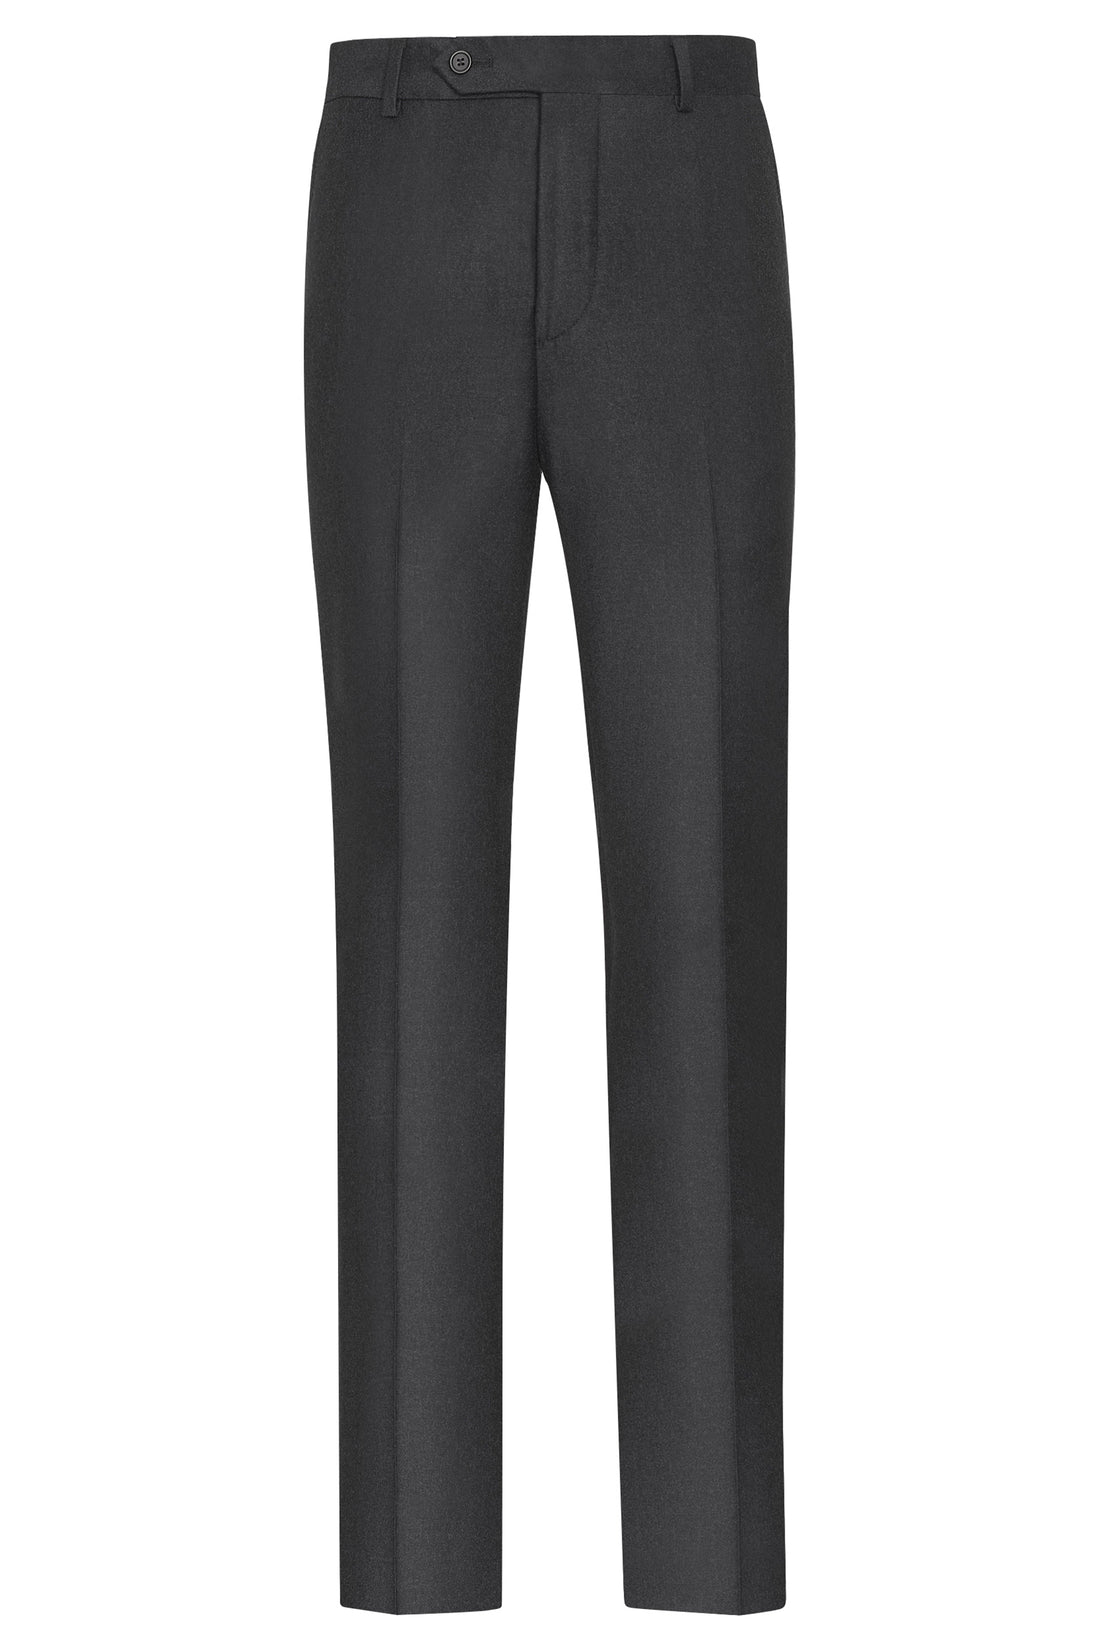 Dark Grey Ice Flannel Flat Front Trousers